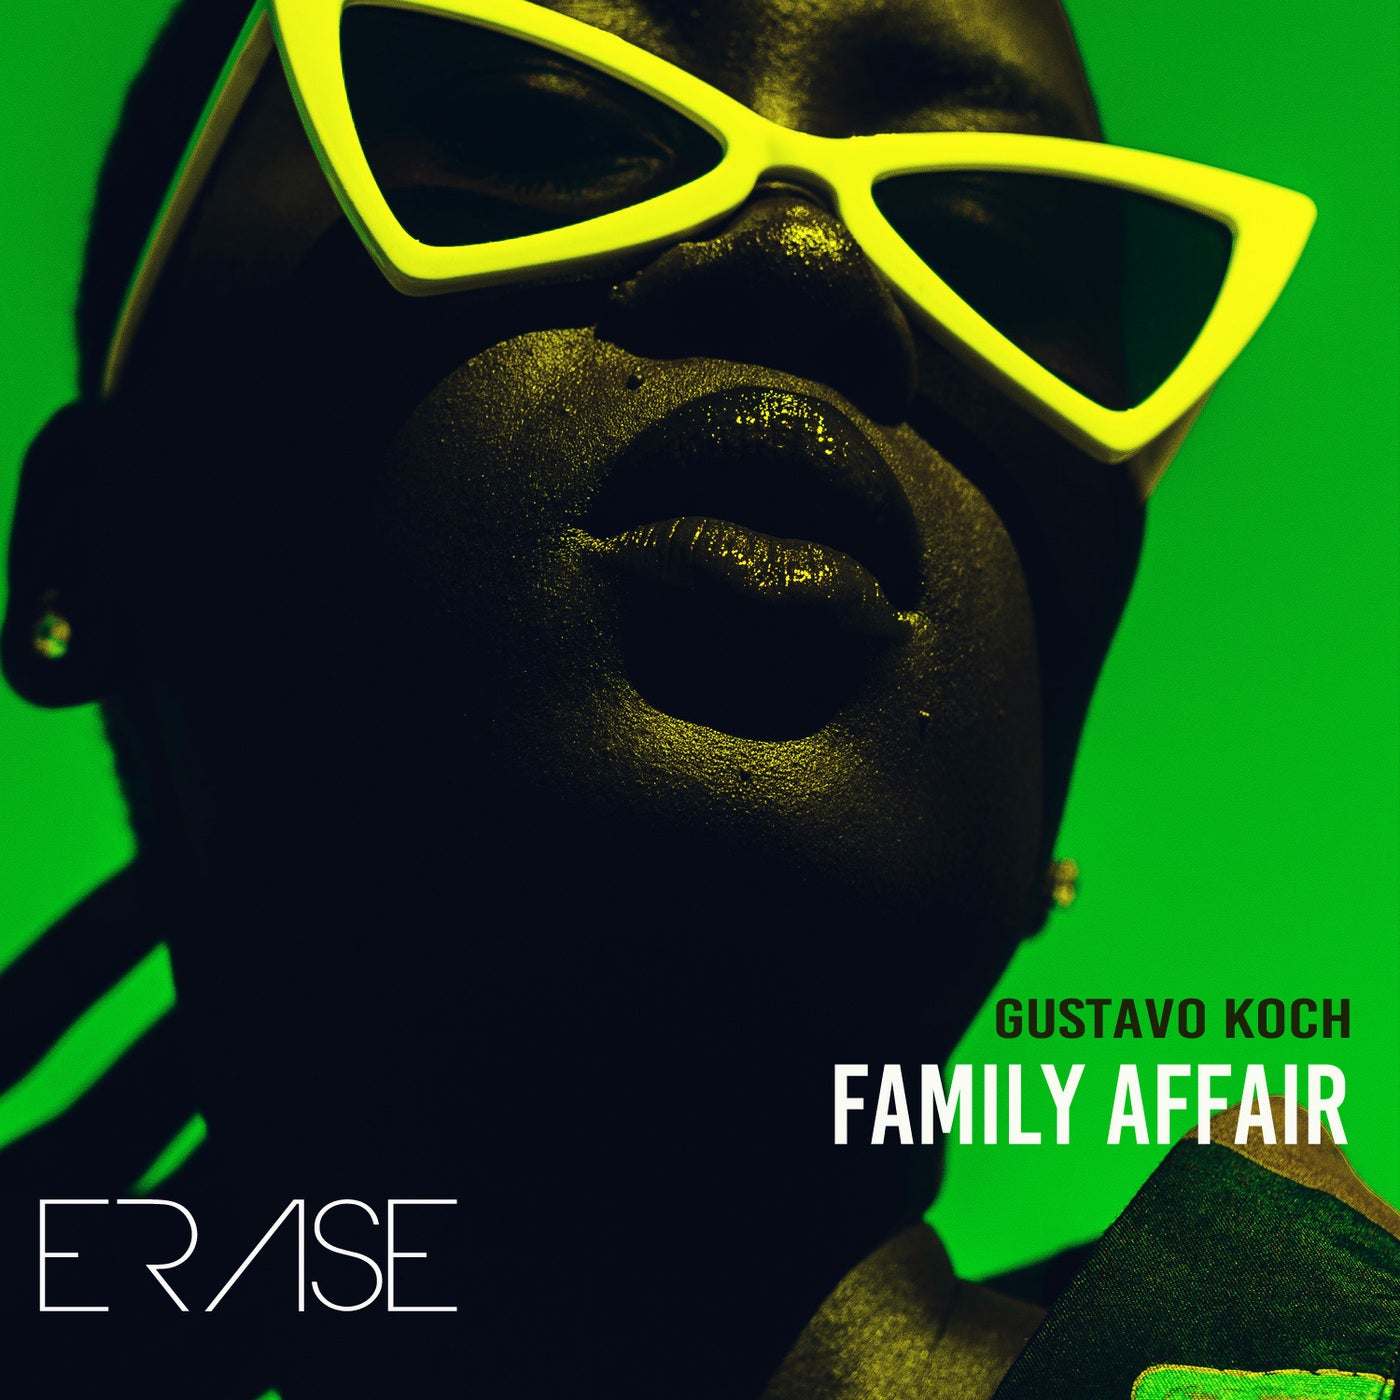 image cover: Gustavo Koch - Family Affair on Erase Records